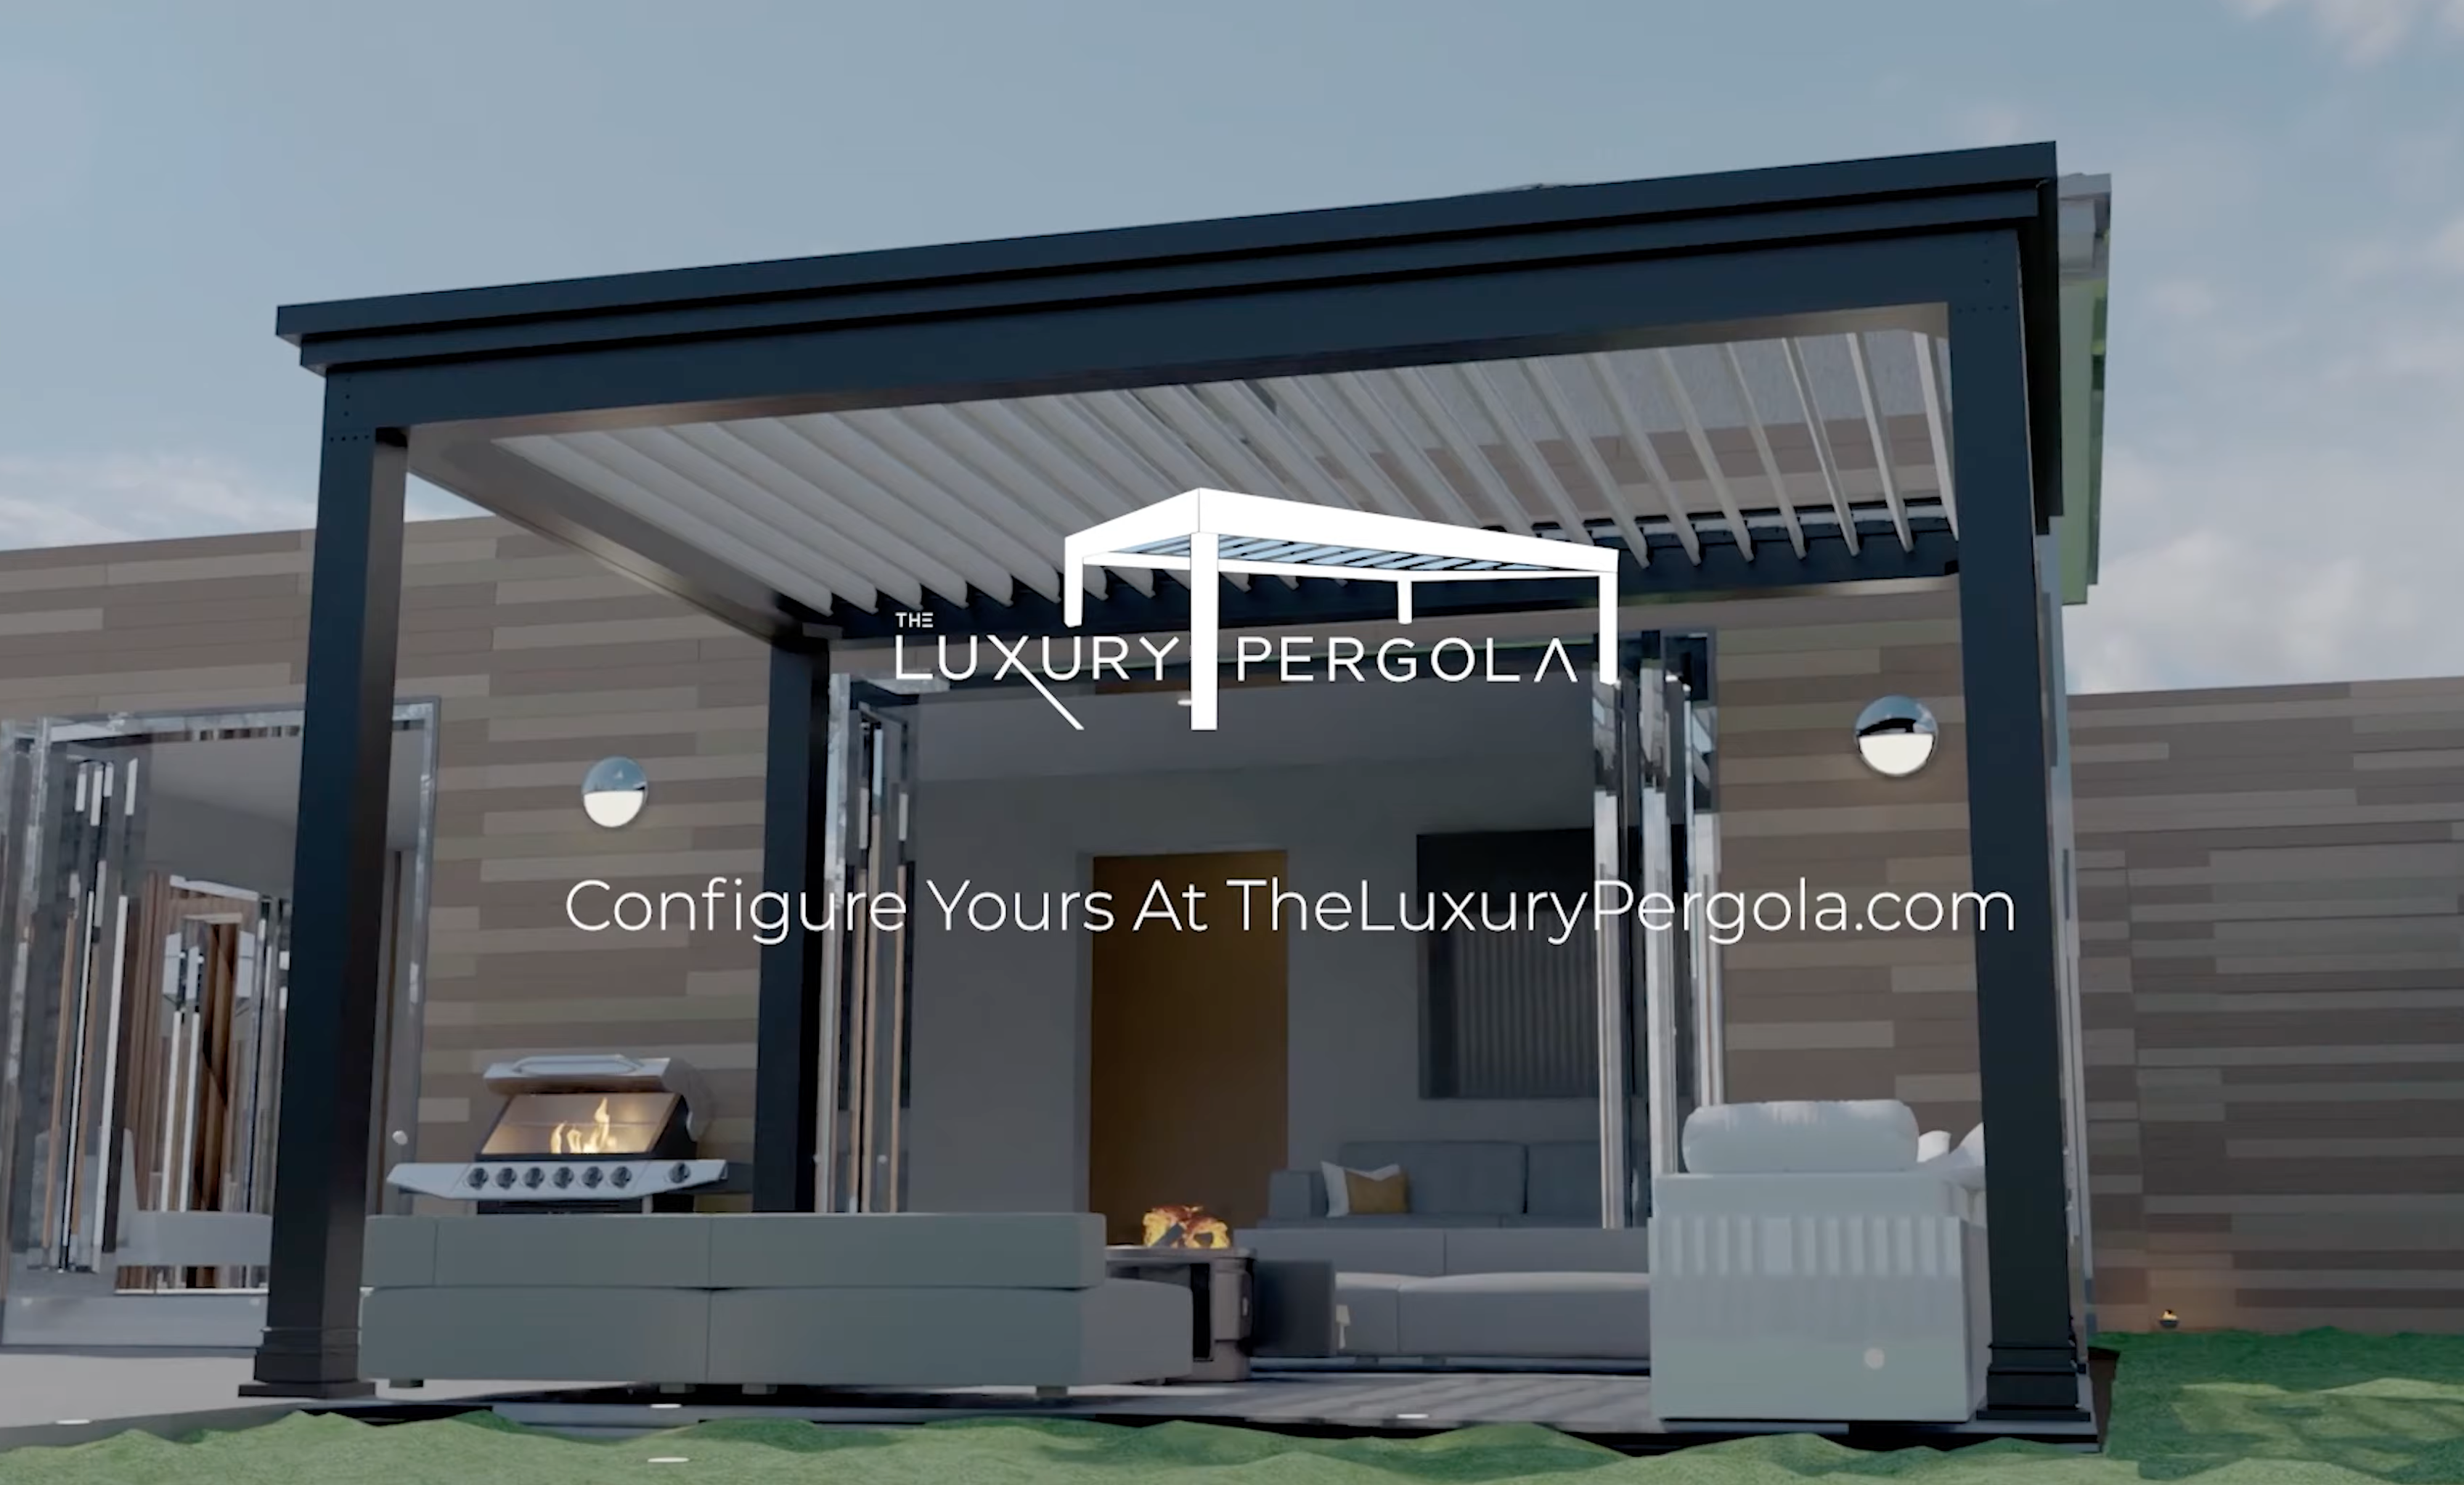 Luxury pergola that is easily assembled